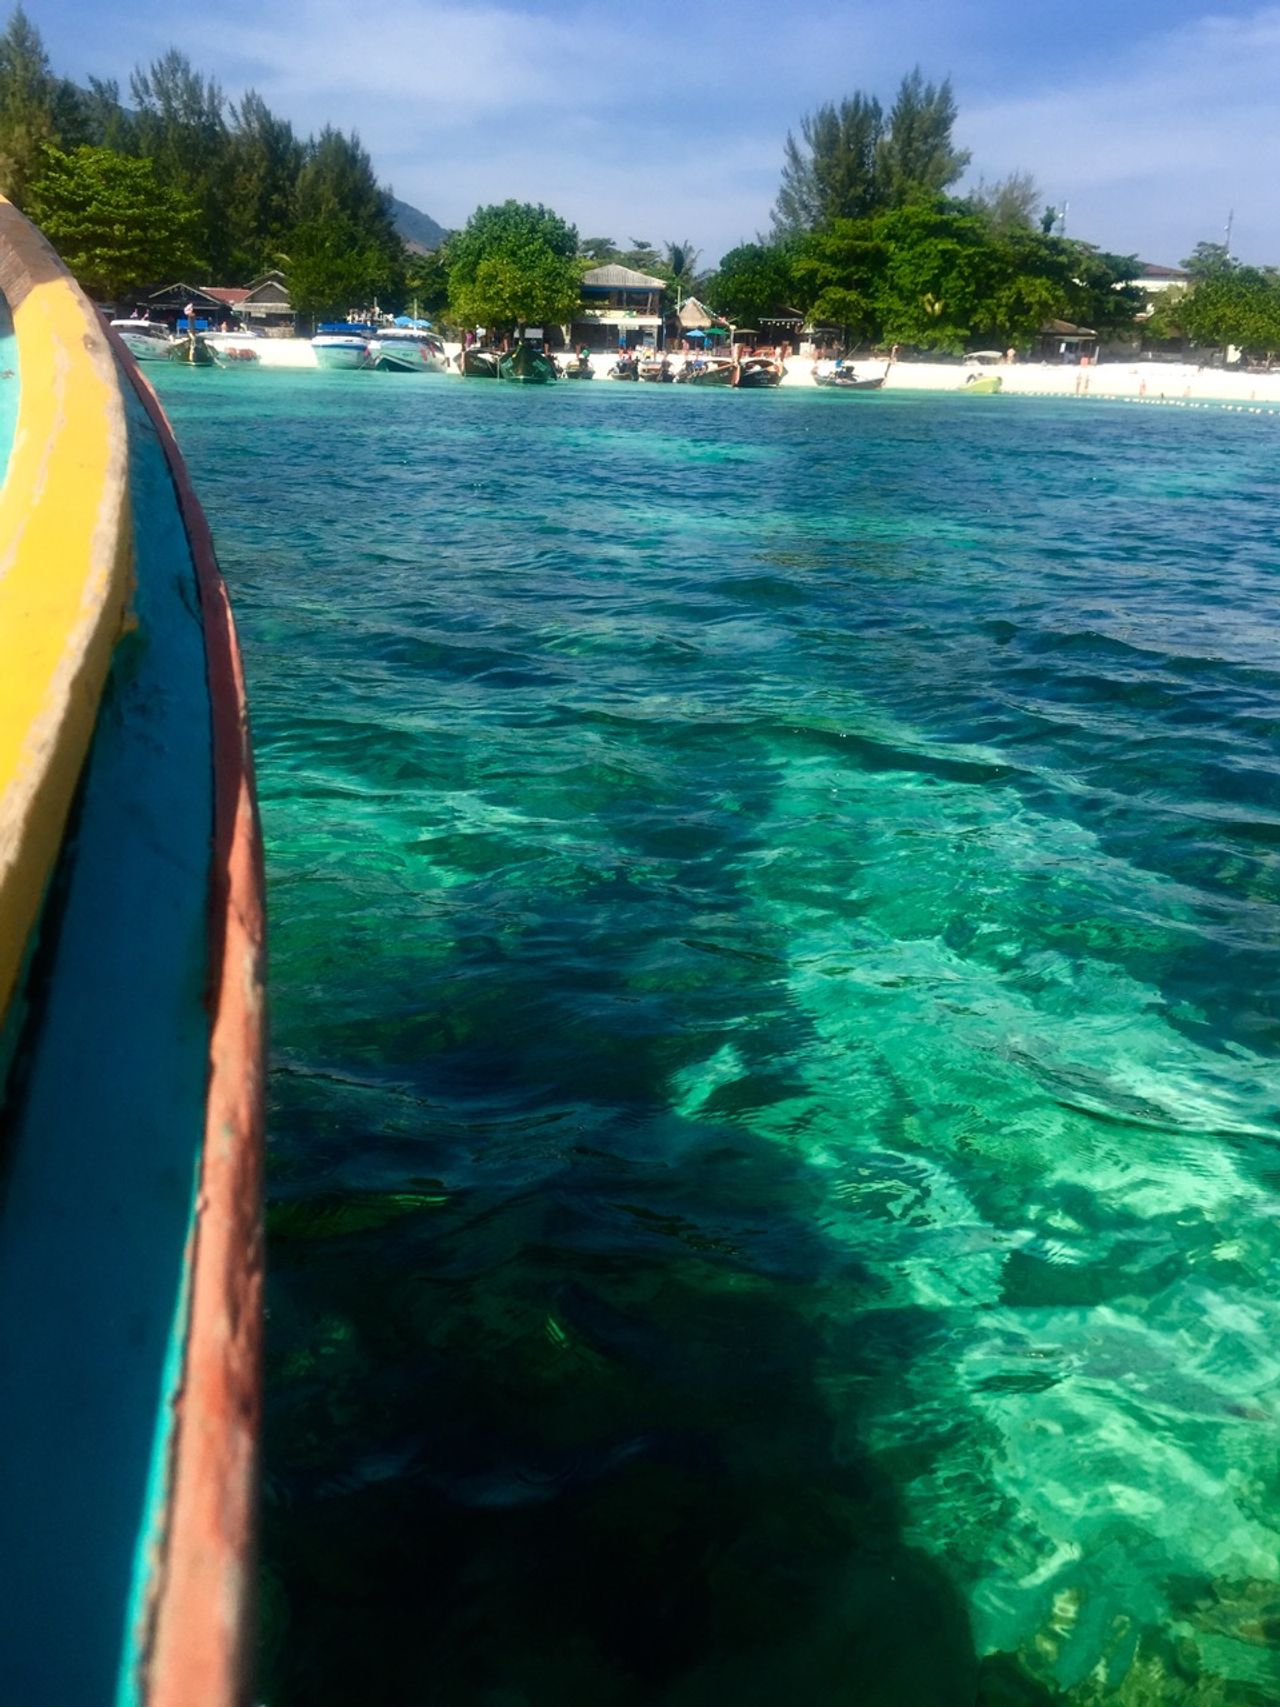 Turquiose, crystal clear water with coral and rocks below a boat.